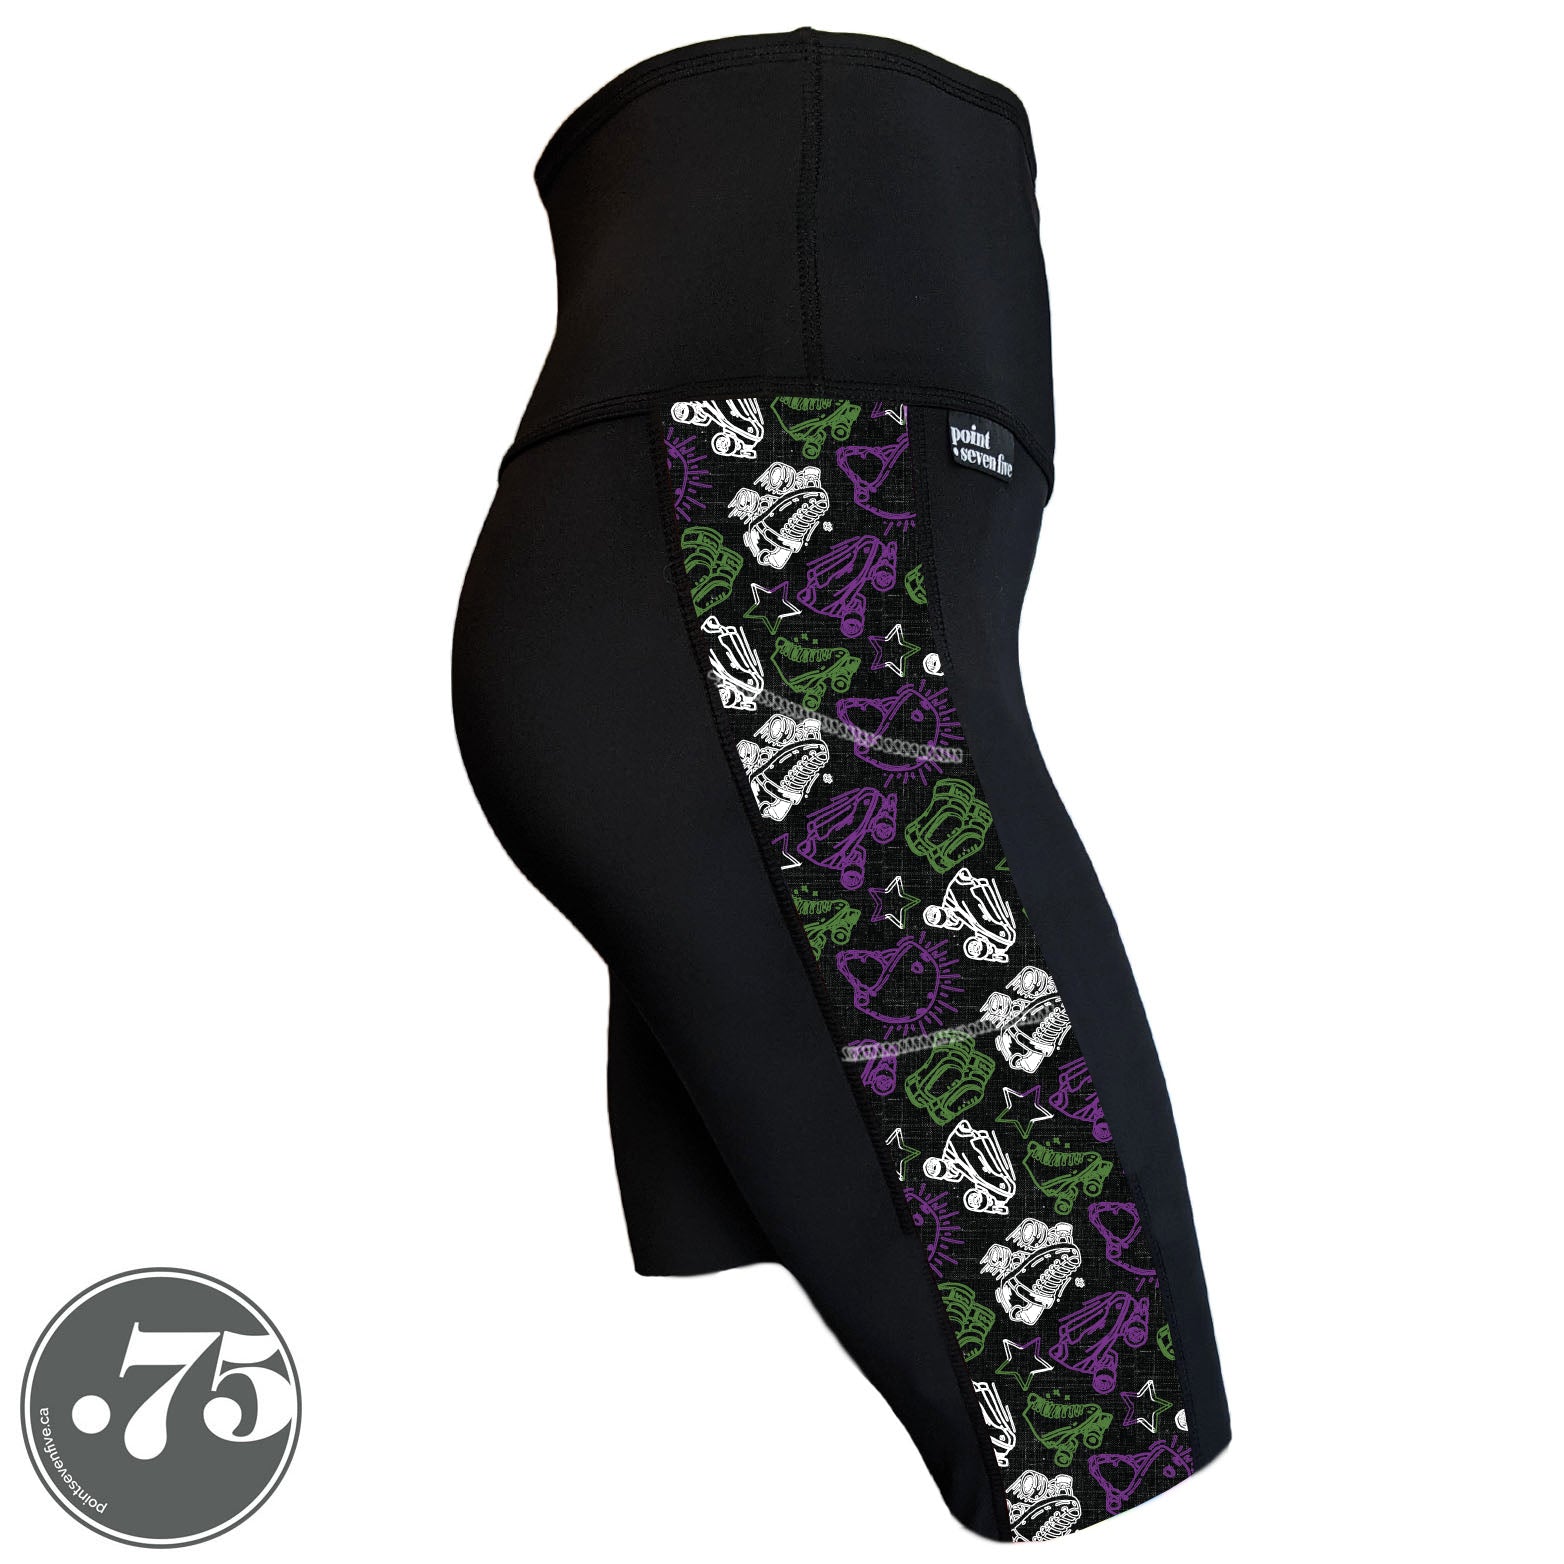 A pair of black spandex knee length shorts on a mannequin, the leggings have a 3.5” wide stripe down the side that has a printed fabric with rollerskates, helmets, stars & knee pads. The graphics are in the colours of the Genderqueer Pride Flag green, purple and white. 